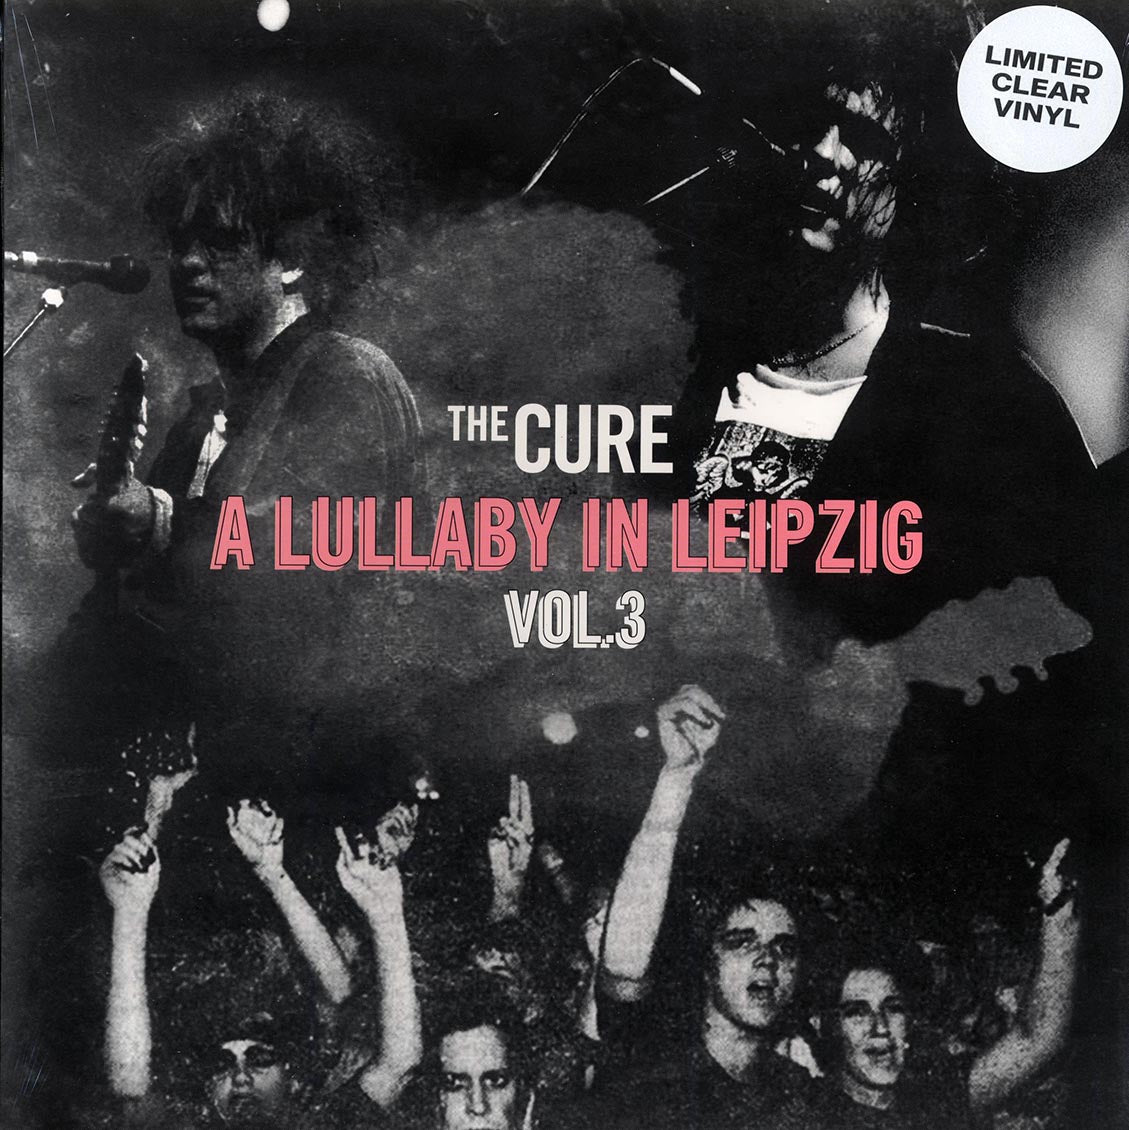 The Cure - A Lullaby In Leipzig Volume 3 (clear vinyl) - Vinyl LP